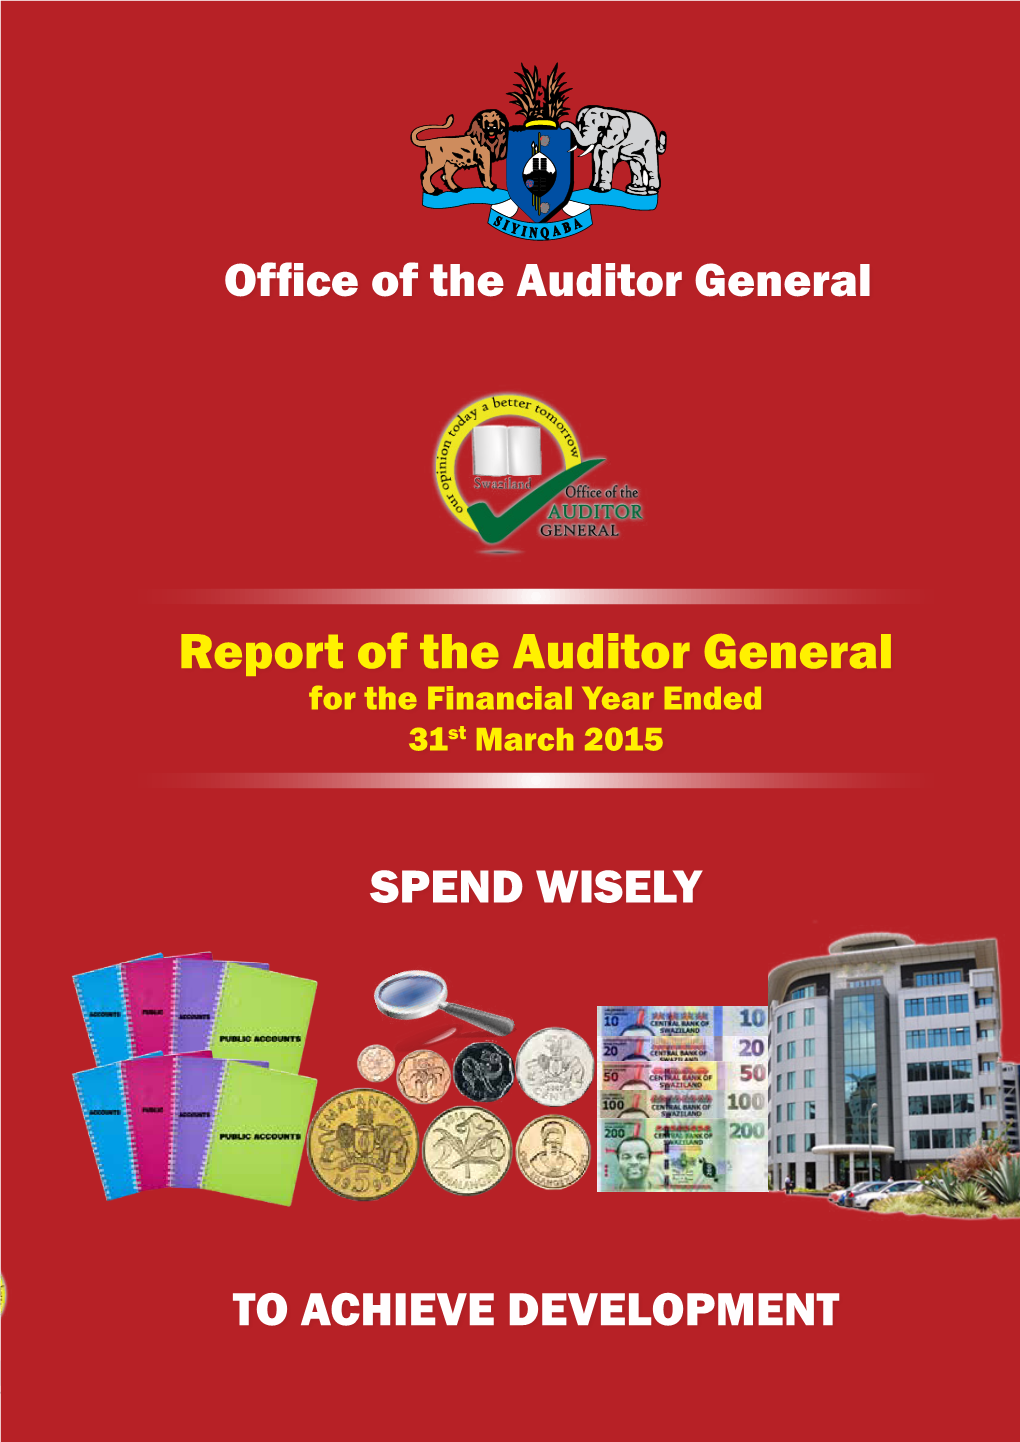 Report of the Auditor General for Financial Year Report Ended 31